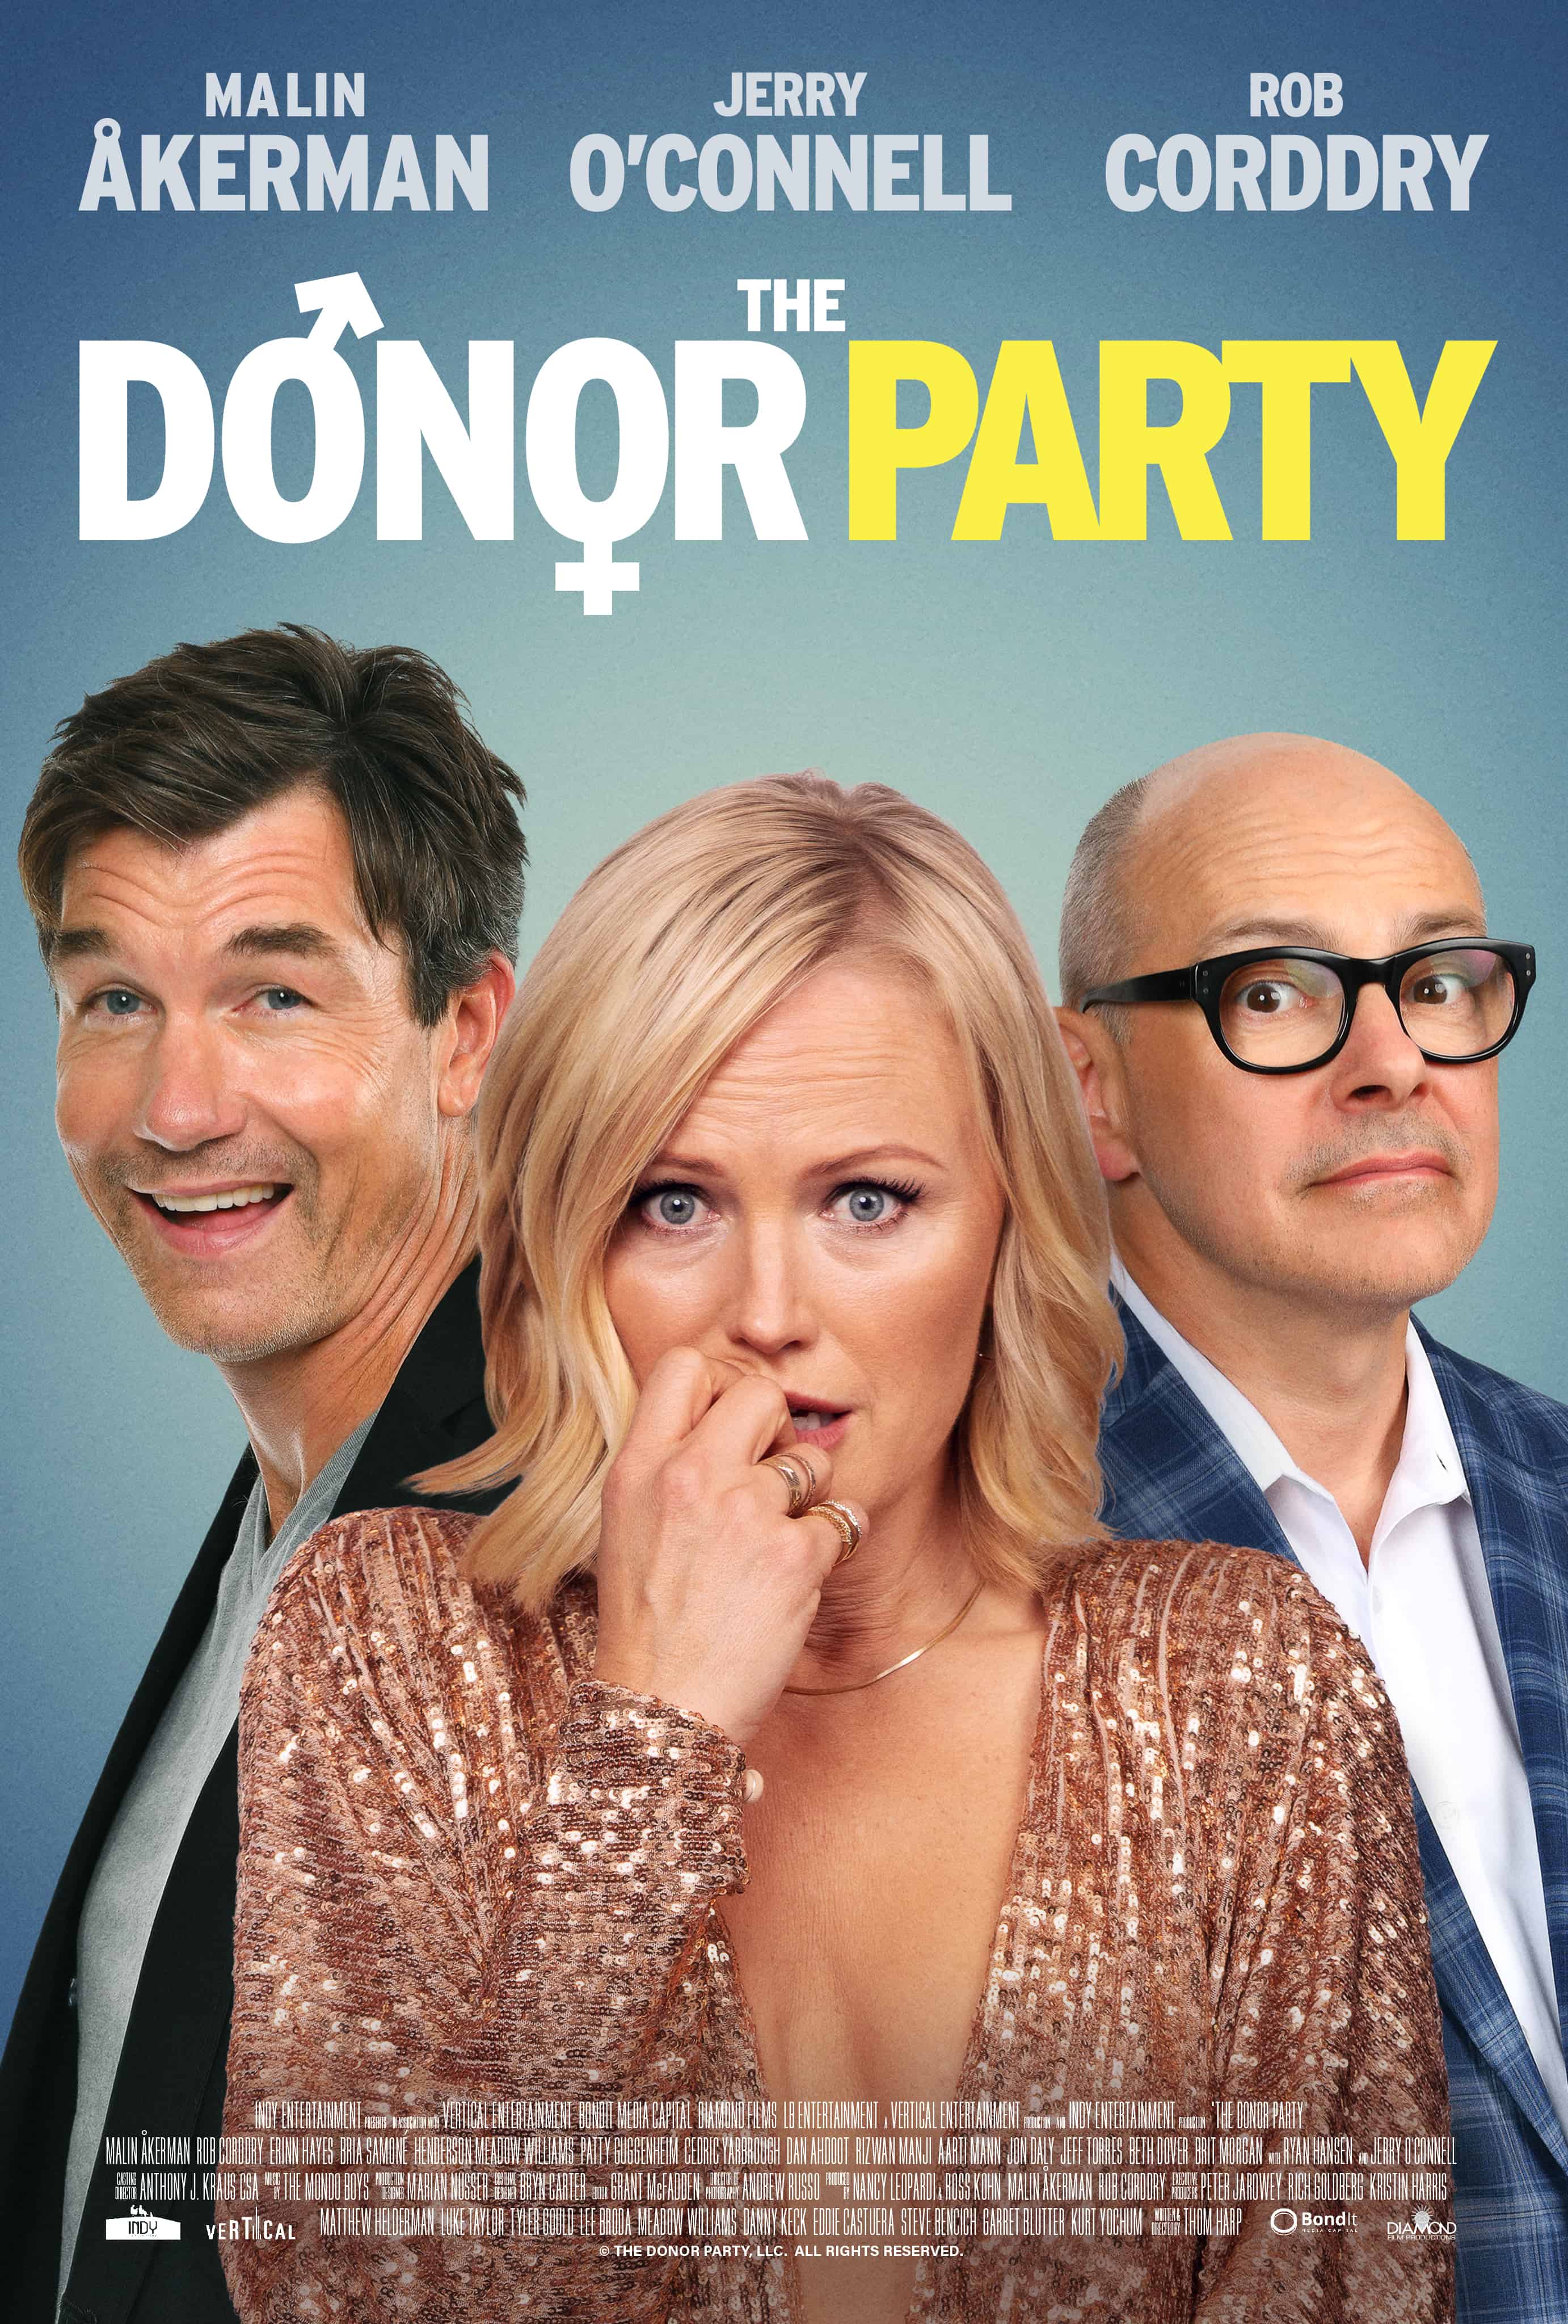 The Donor Party has a new clip! 28